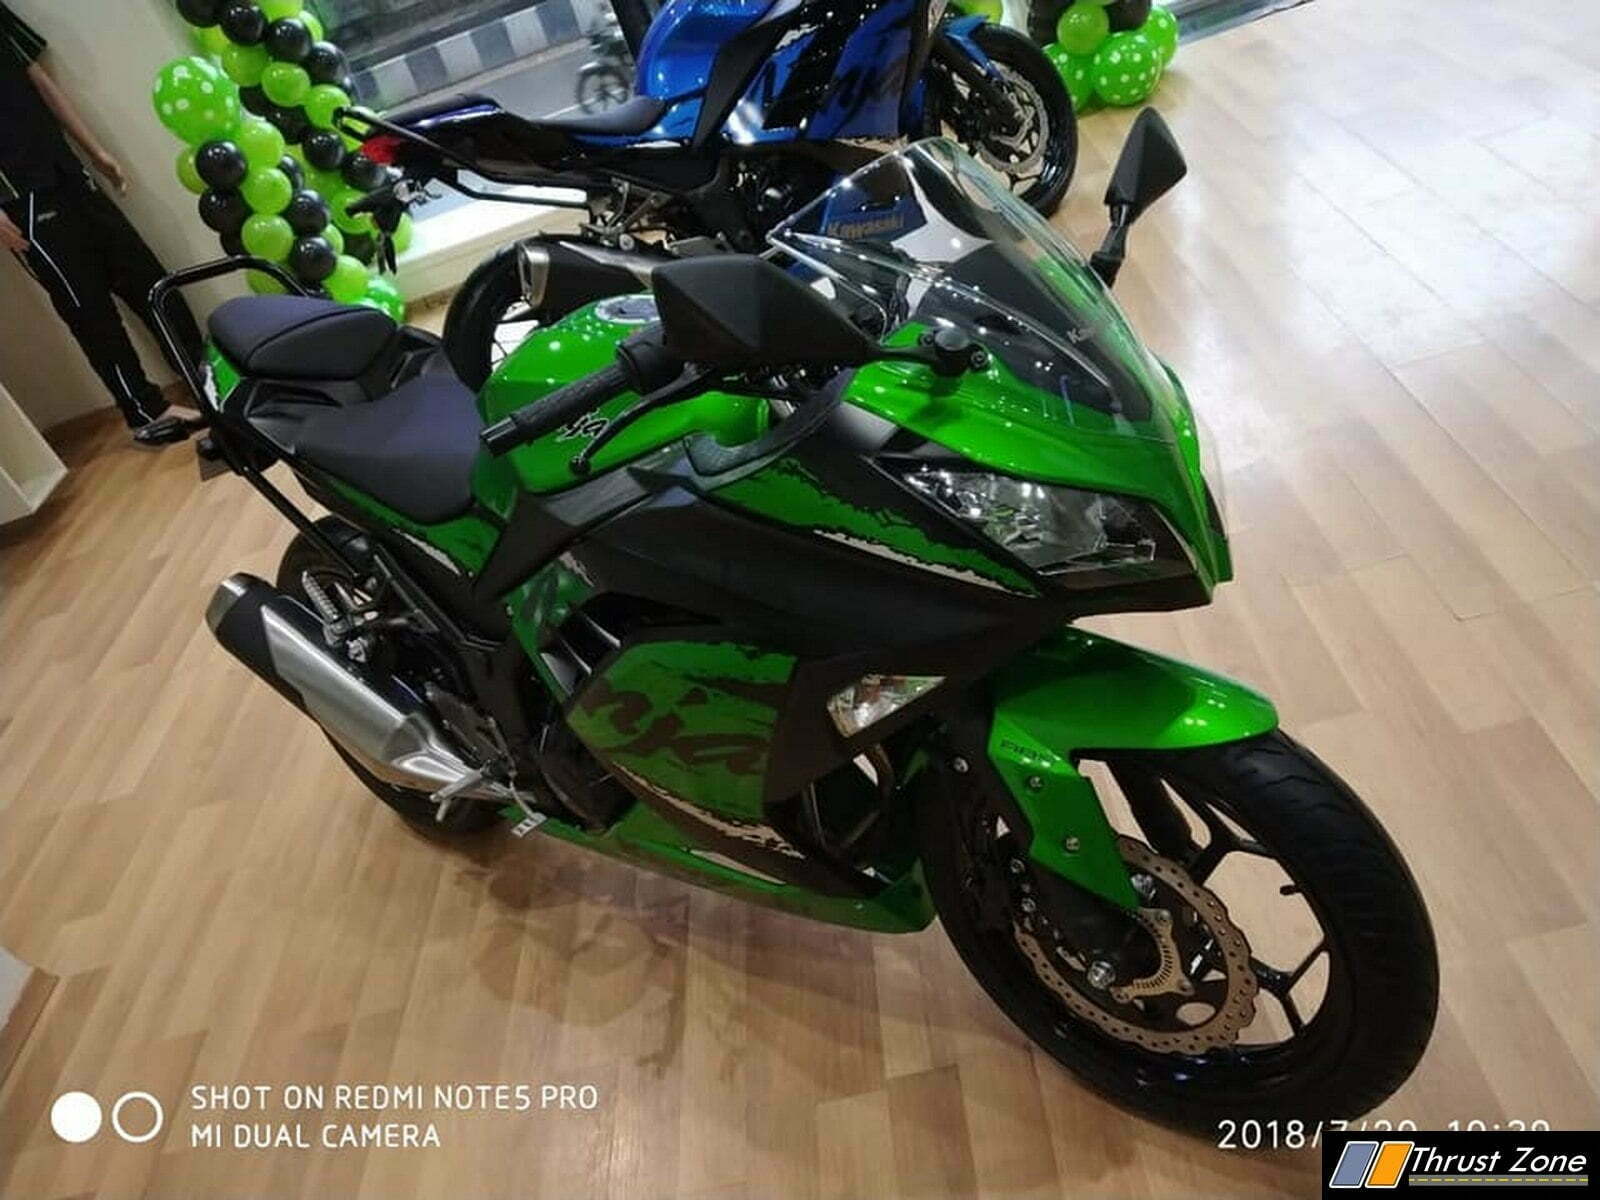 Diktere hellig professionel 2018 Kawasaki Ninja 300 India Launch Done With ABS and New Colors -  Shocking Prices!